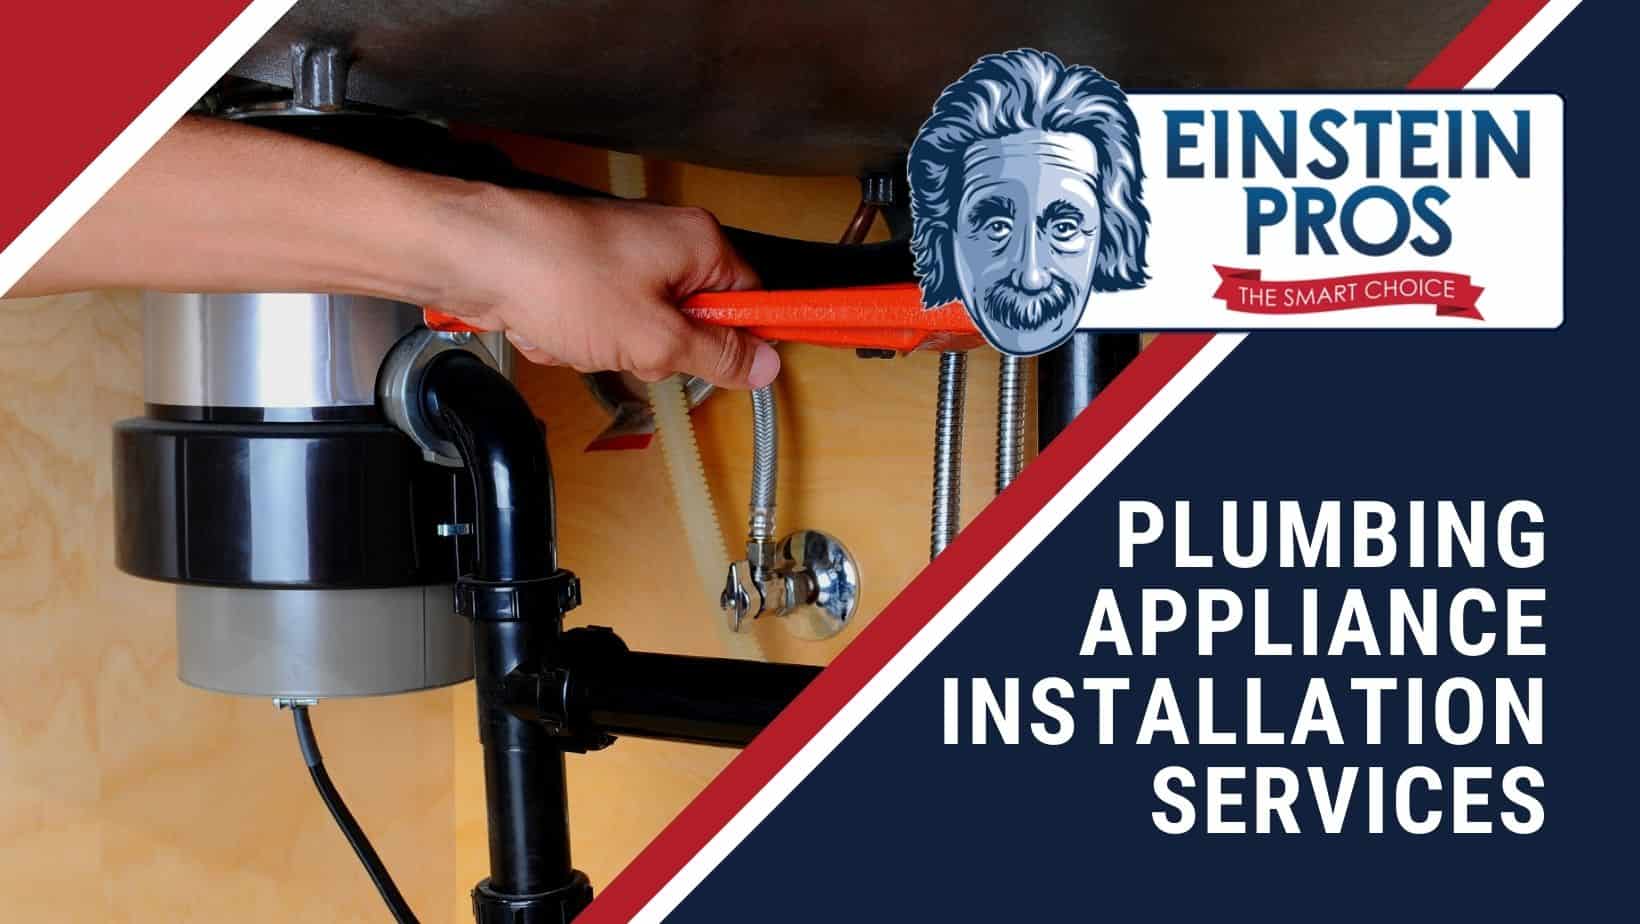 Idaho residential appliance installer license prep class download the new version for android